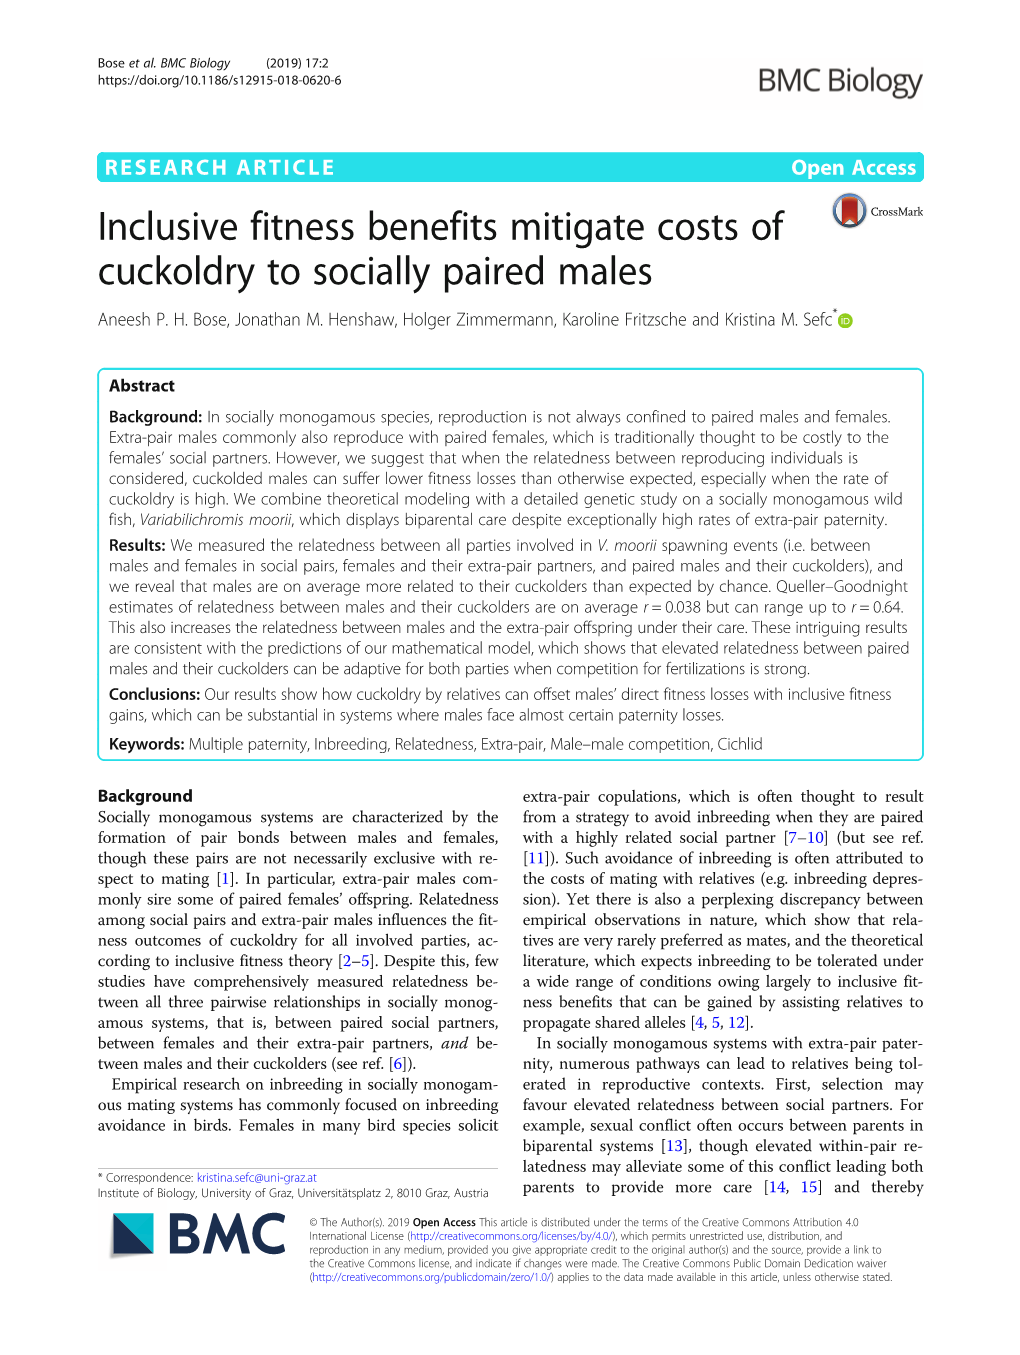 Inclusive Fitness Benefits Mitigate Costs of Cuckoldry to Socially Paired Males Aneesh P